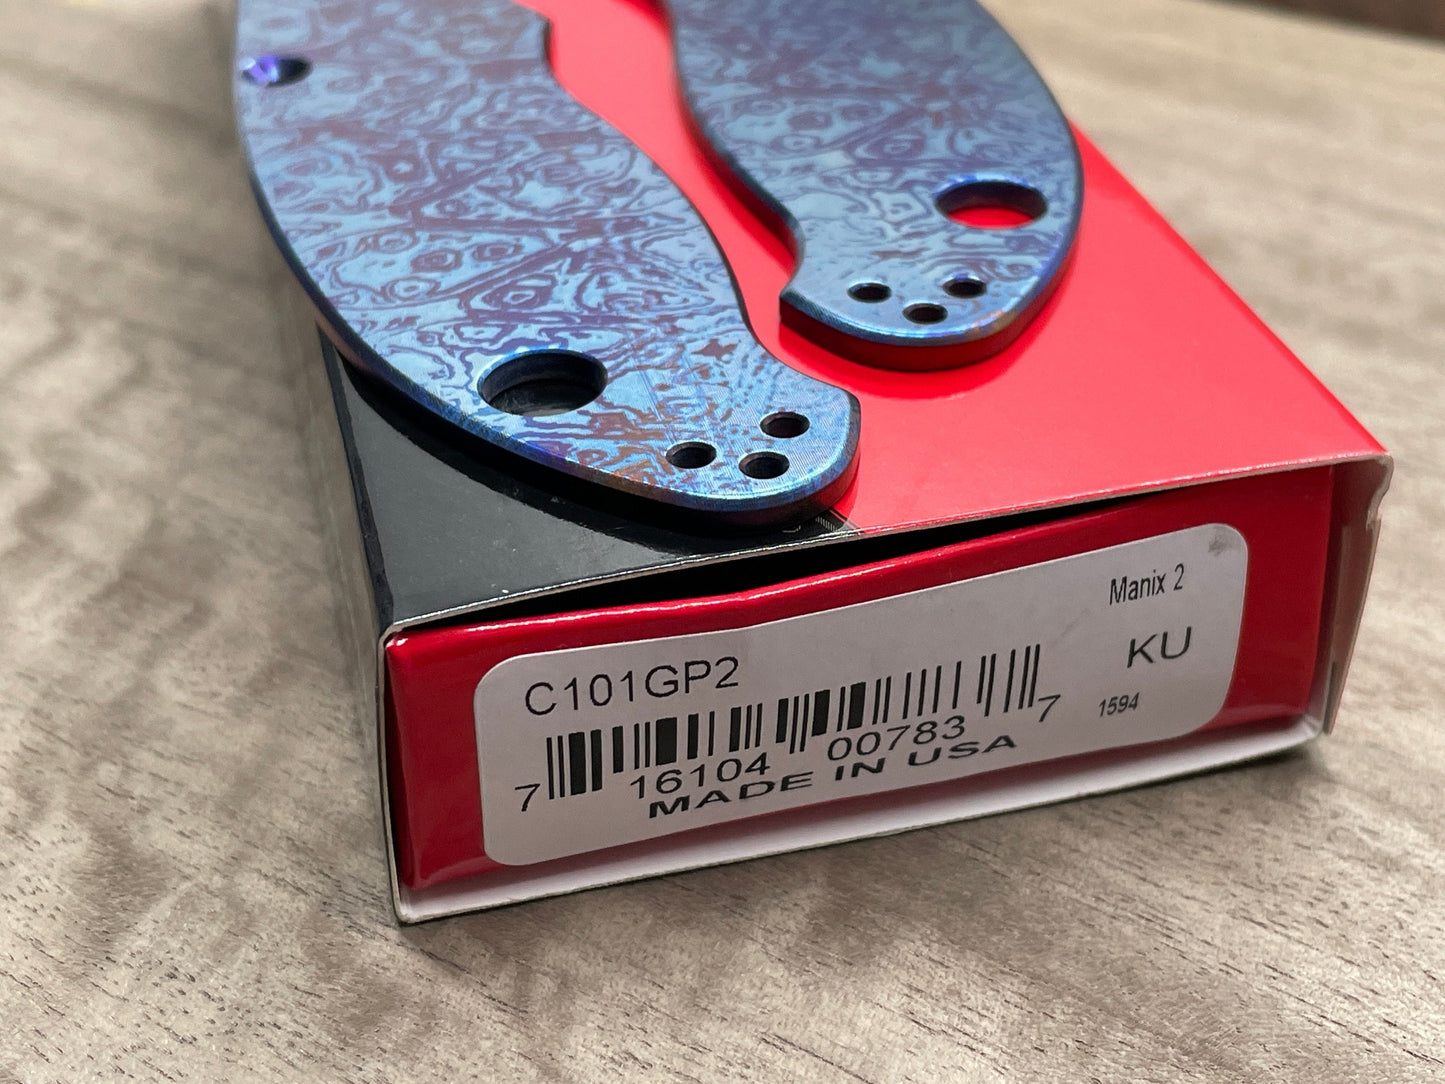 Flamed CIRCUIT Board engraved Titanium scales for Spyderco MANIX 2